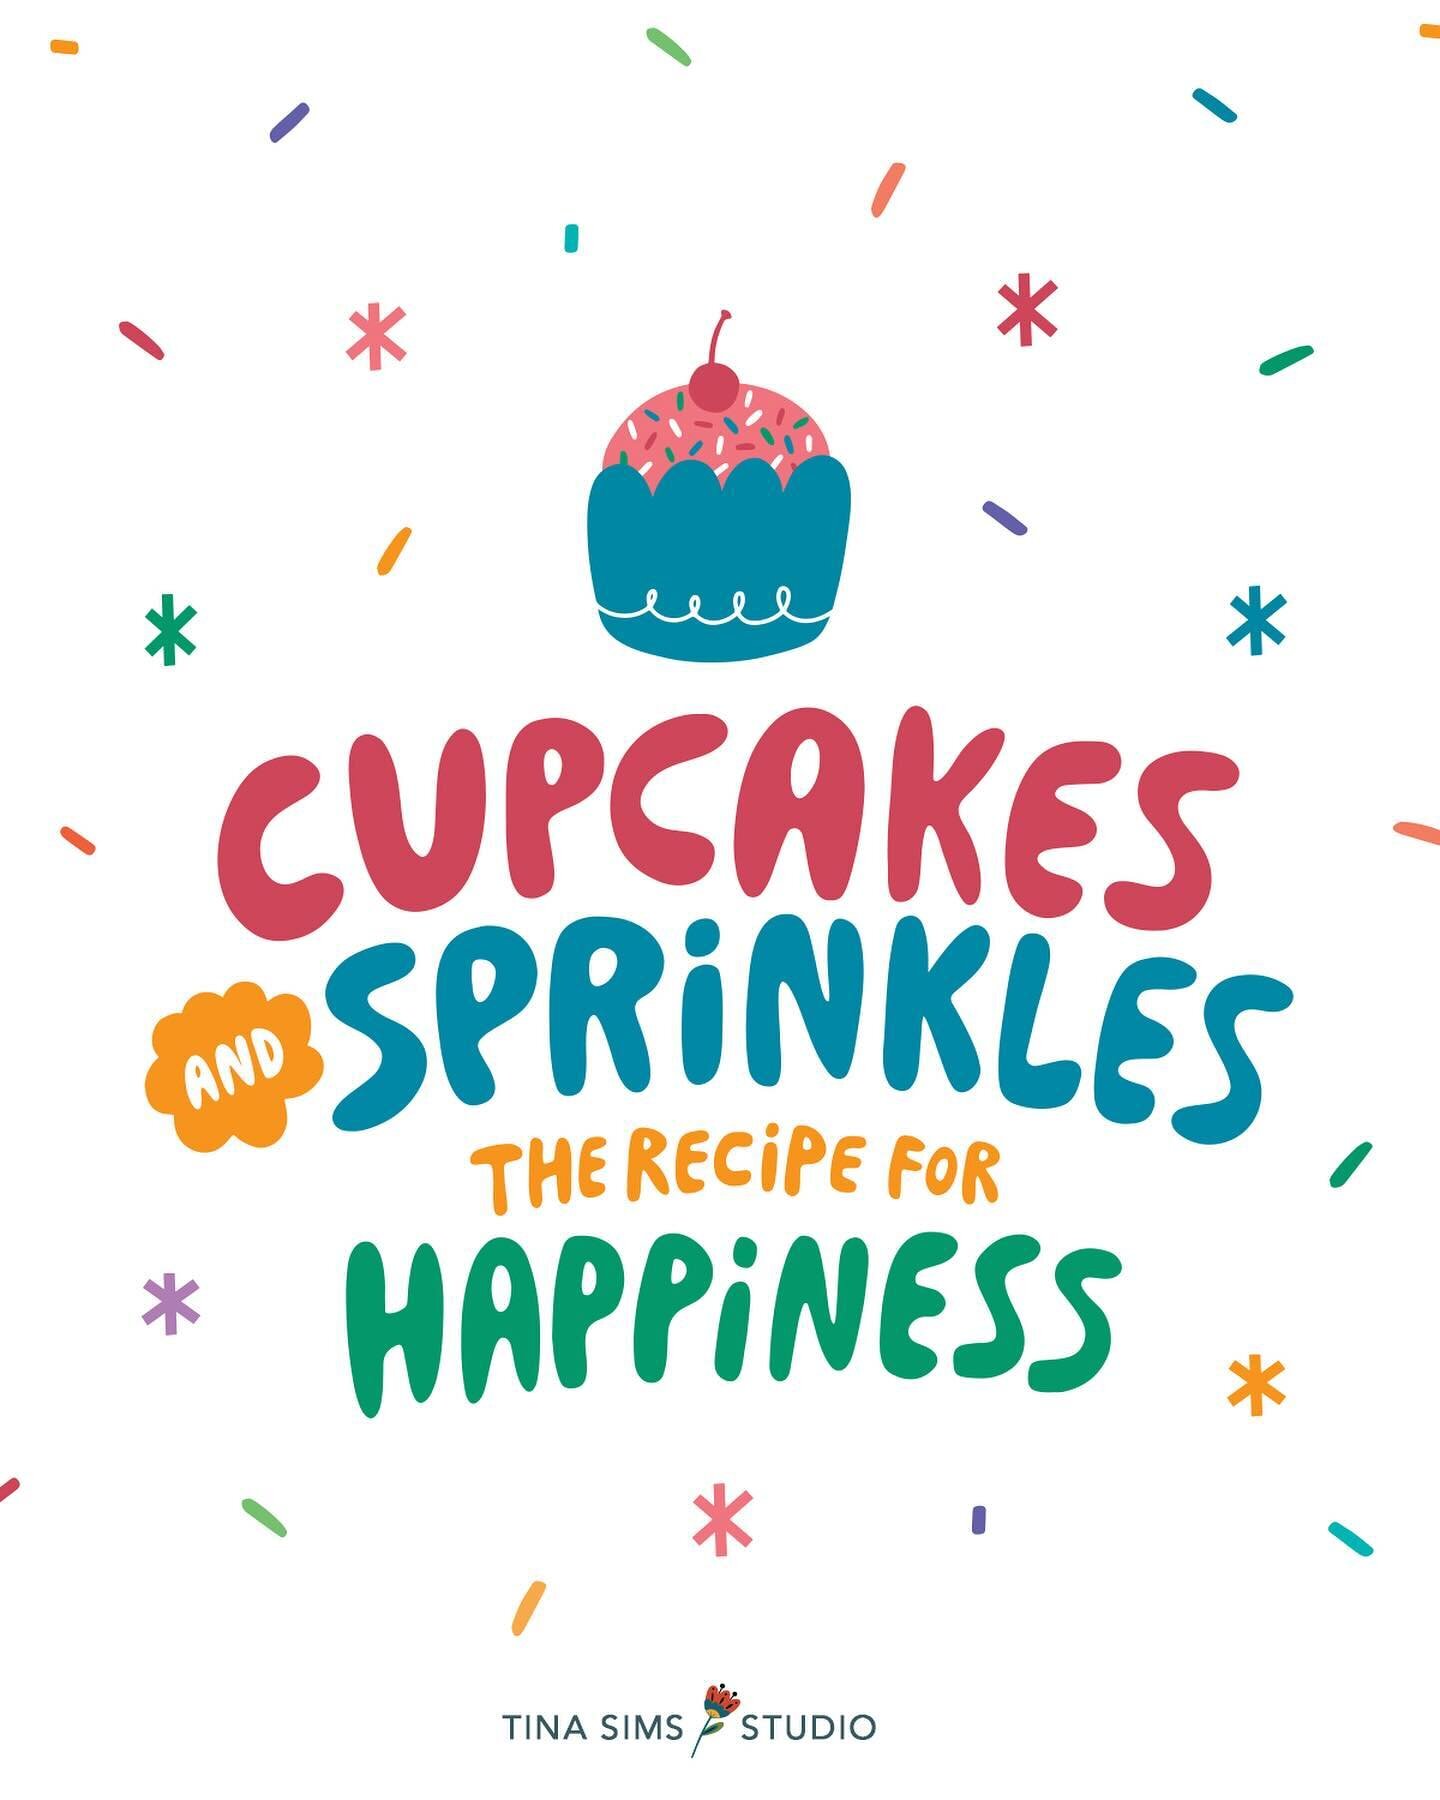 What&rsquo;s your recipe for happiness? 🧁🍪🍭 Cupcakes and sprinkles are pretty happy &ndash; they&rsquo;re just so pretty. But I think the real recipe for me is a root beer float. Yum!

_______

#cupcakeart #handlettering #sweettreats #bakingfun #k